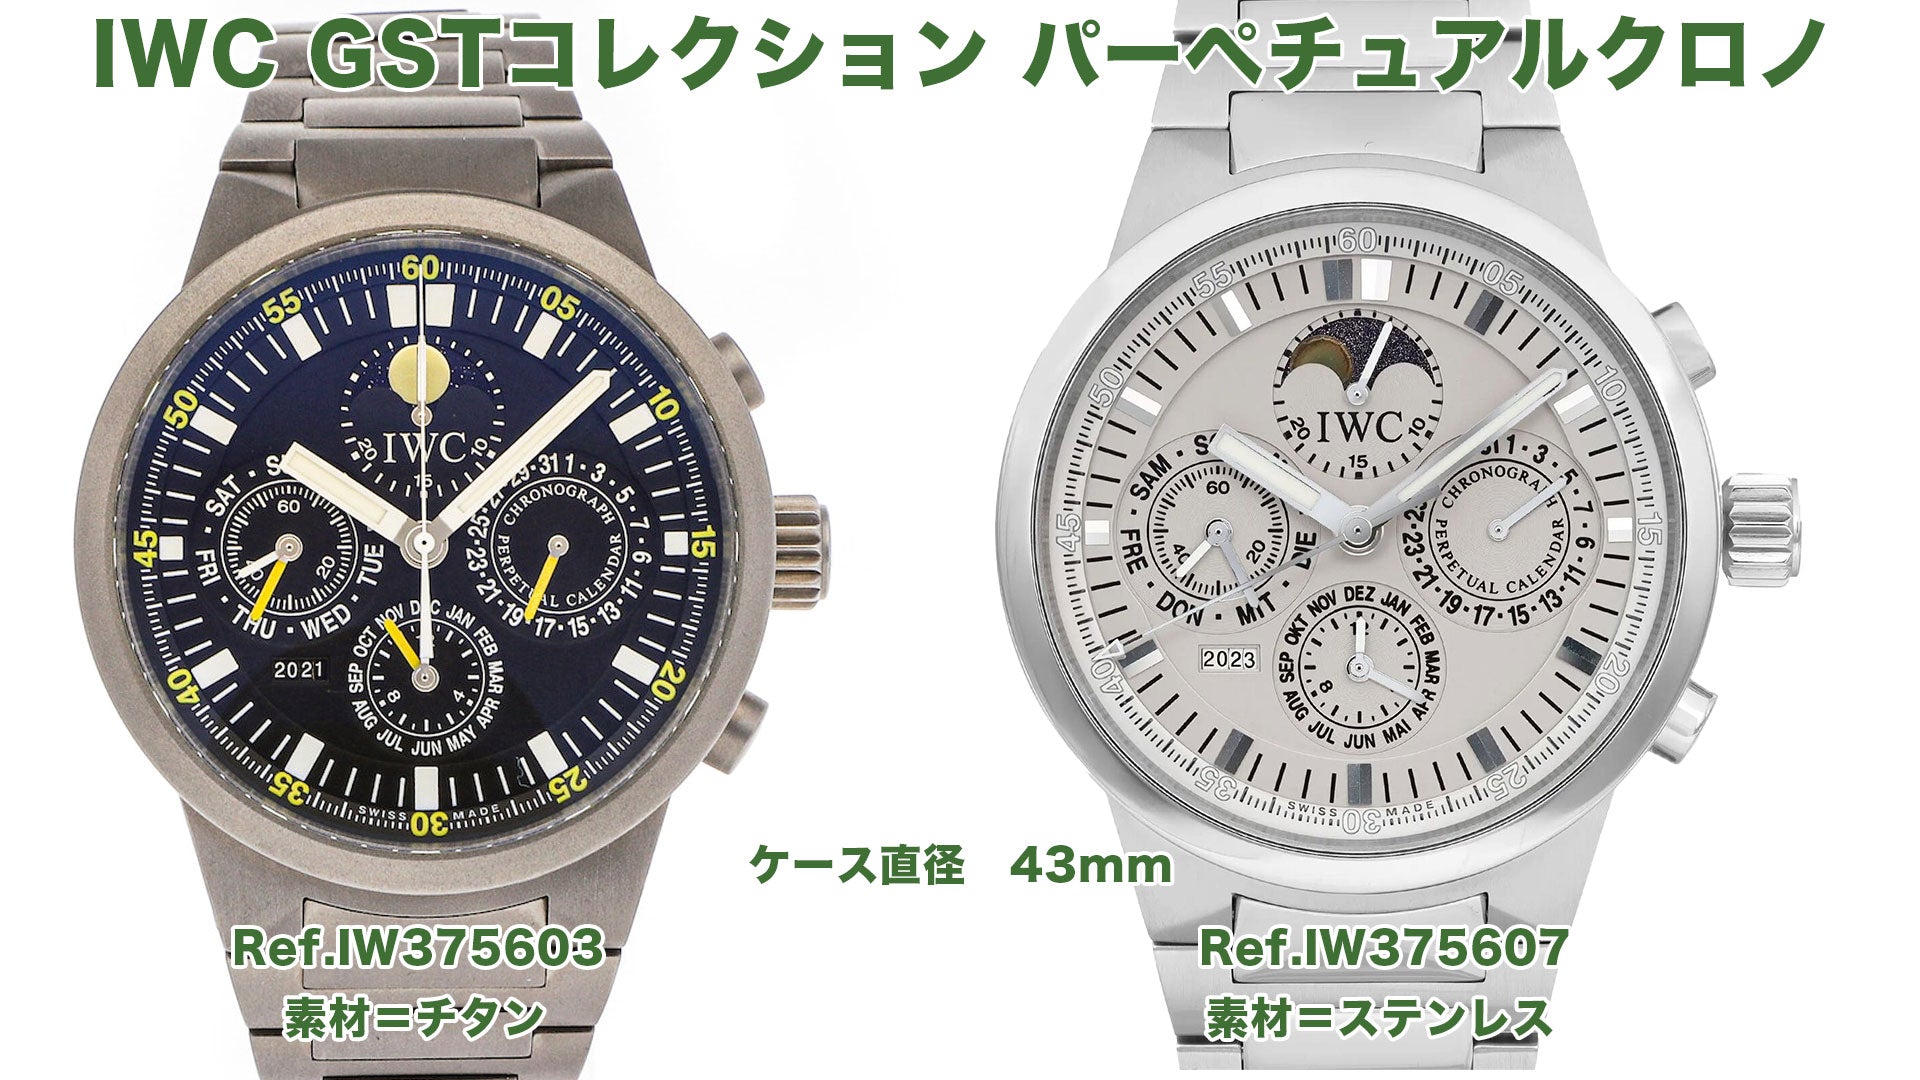 IWC GST Collection Perpetual Chrono Ref.IW375603 & Ref.IW375607